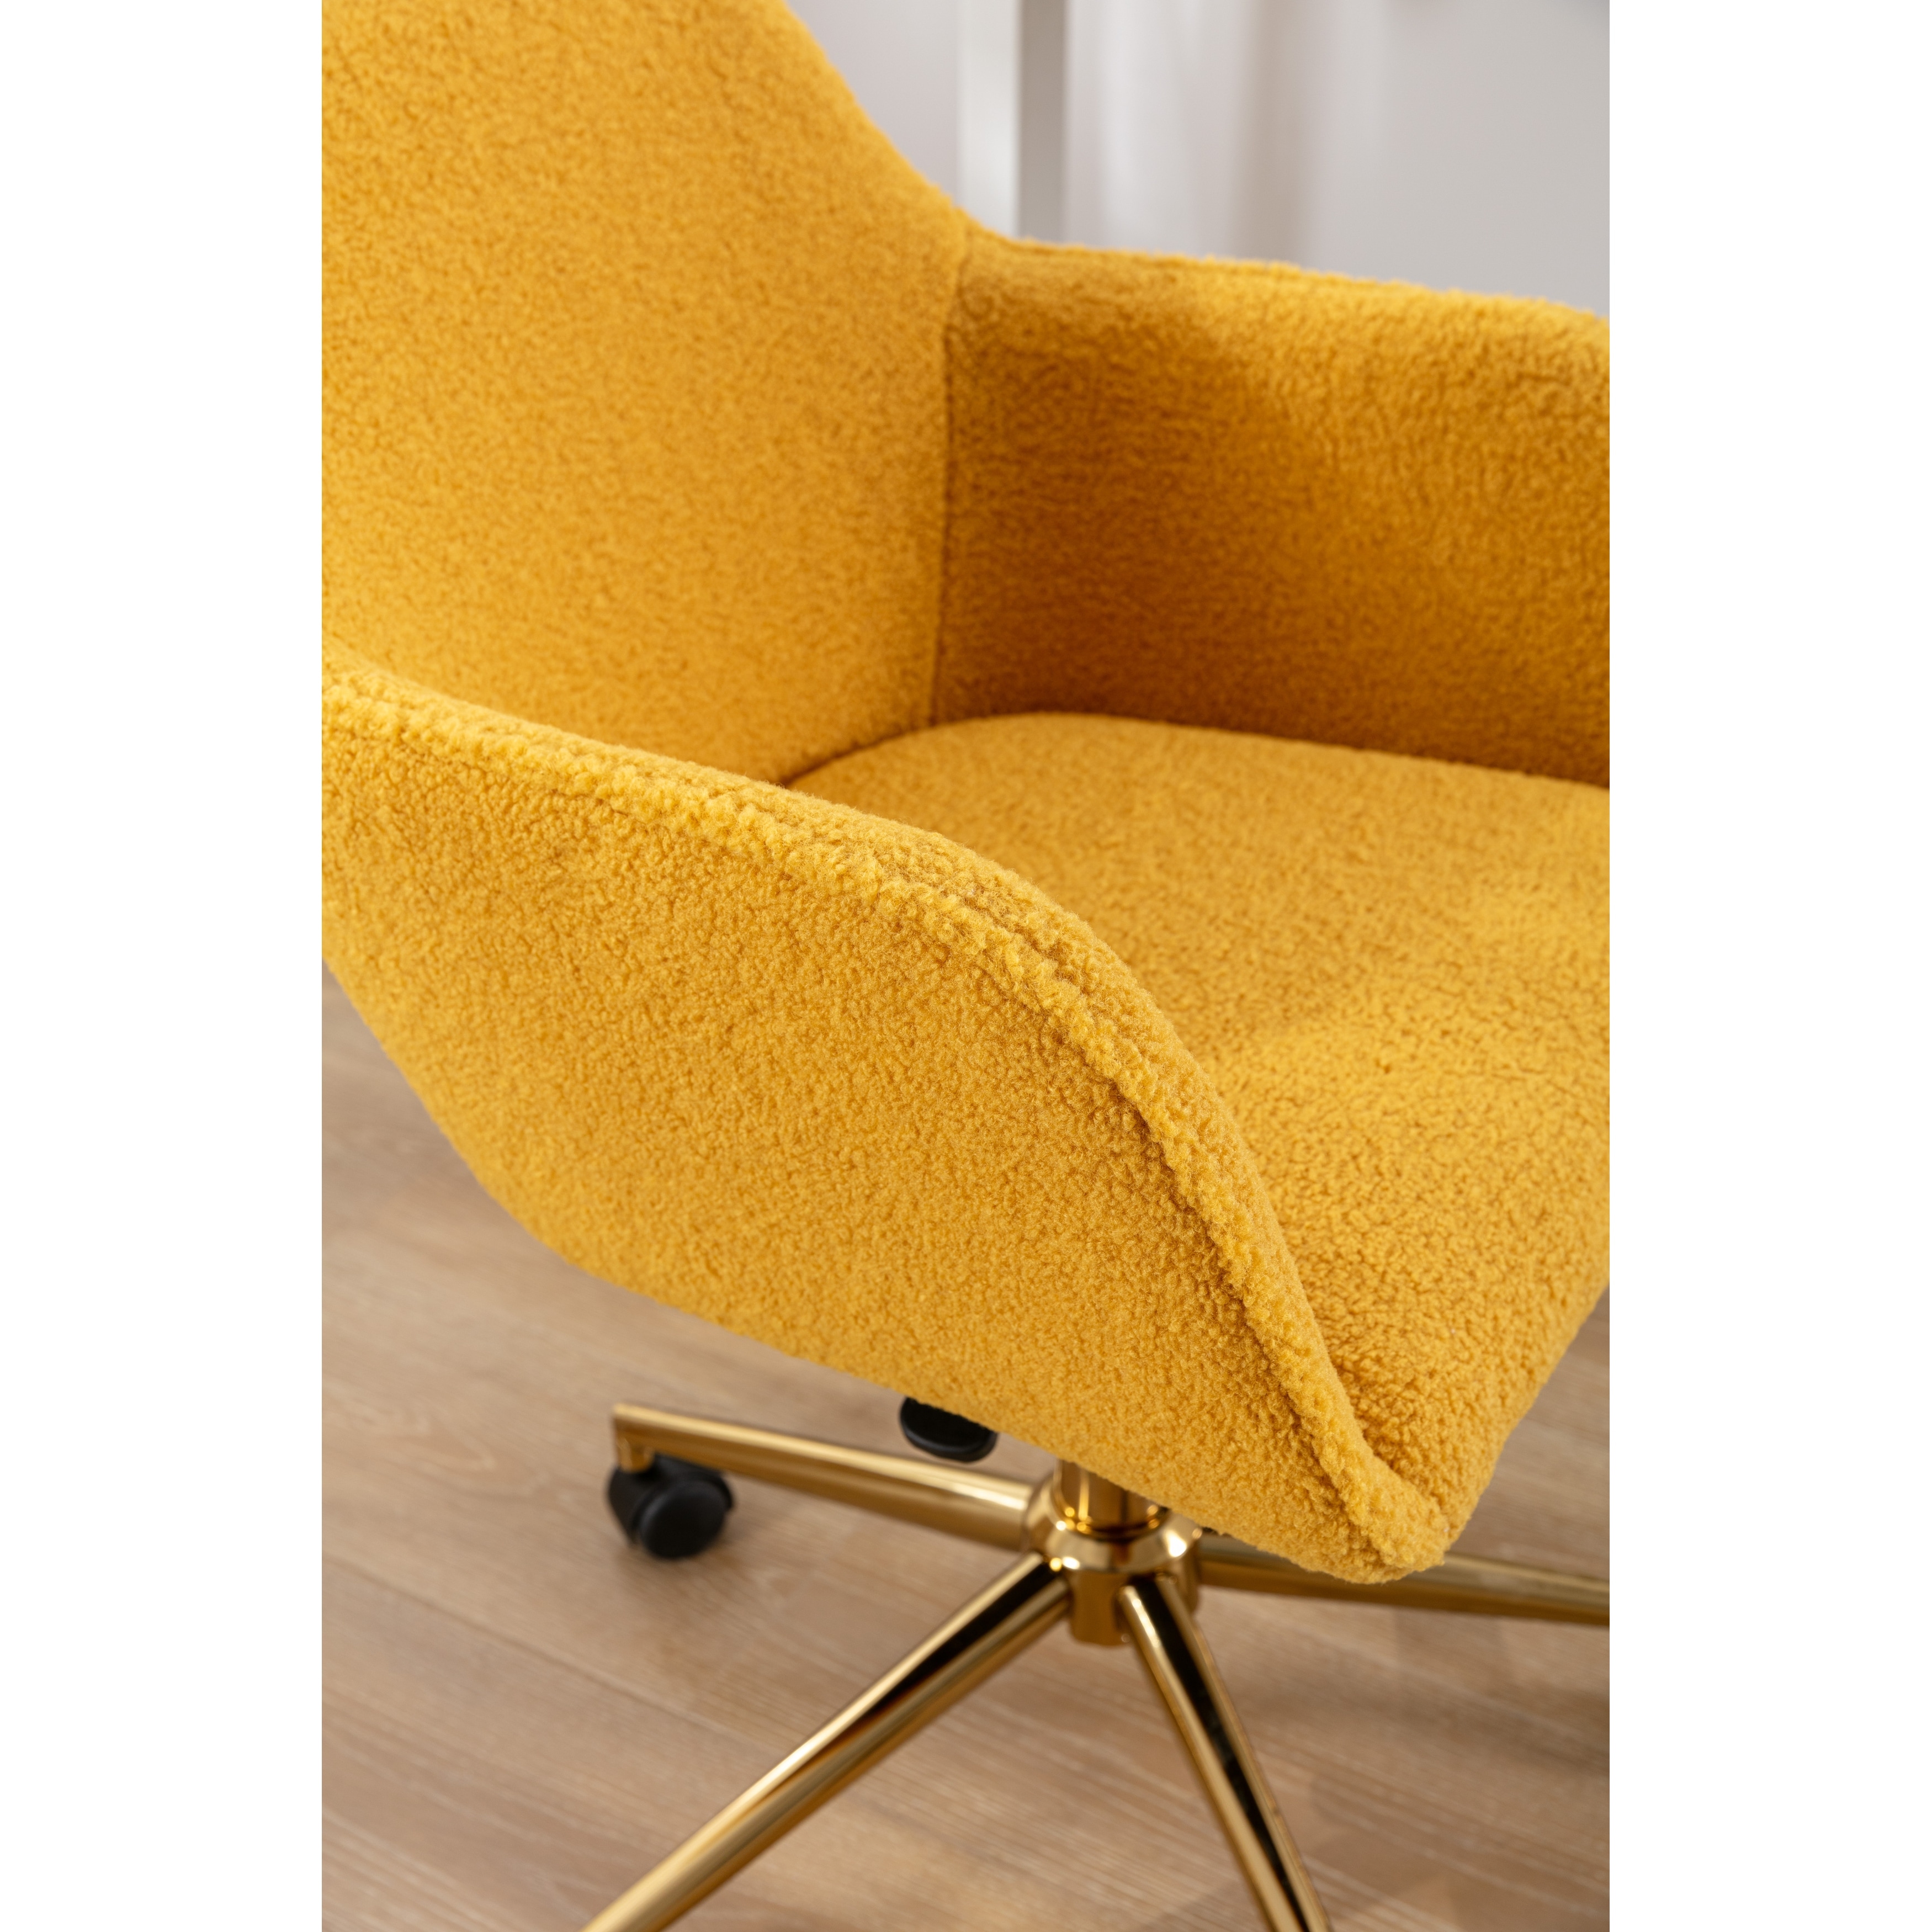 Teddy Fabric 360° Revolving Home Office Chair with Adjustable Height Modern Ergonomic Office Chair with Universal Wheel for - Yellow Teddy